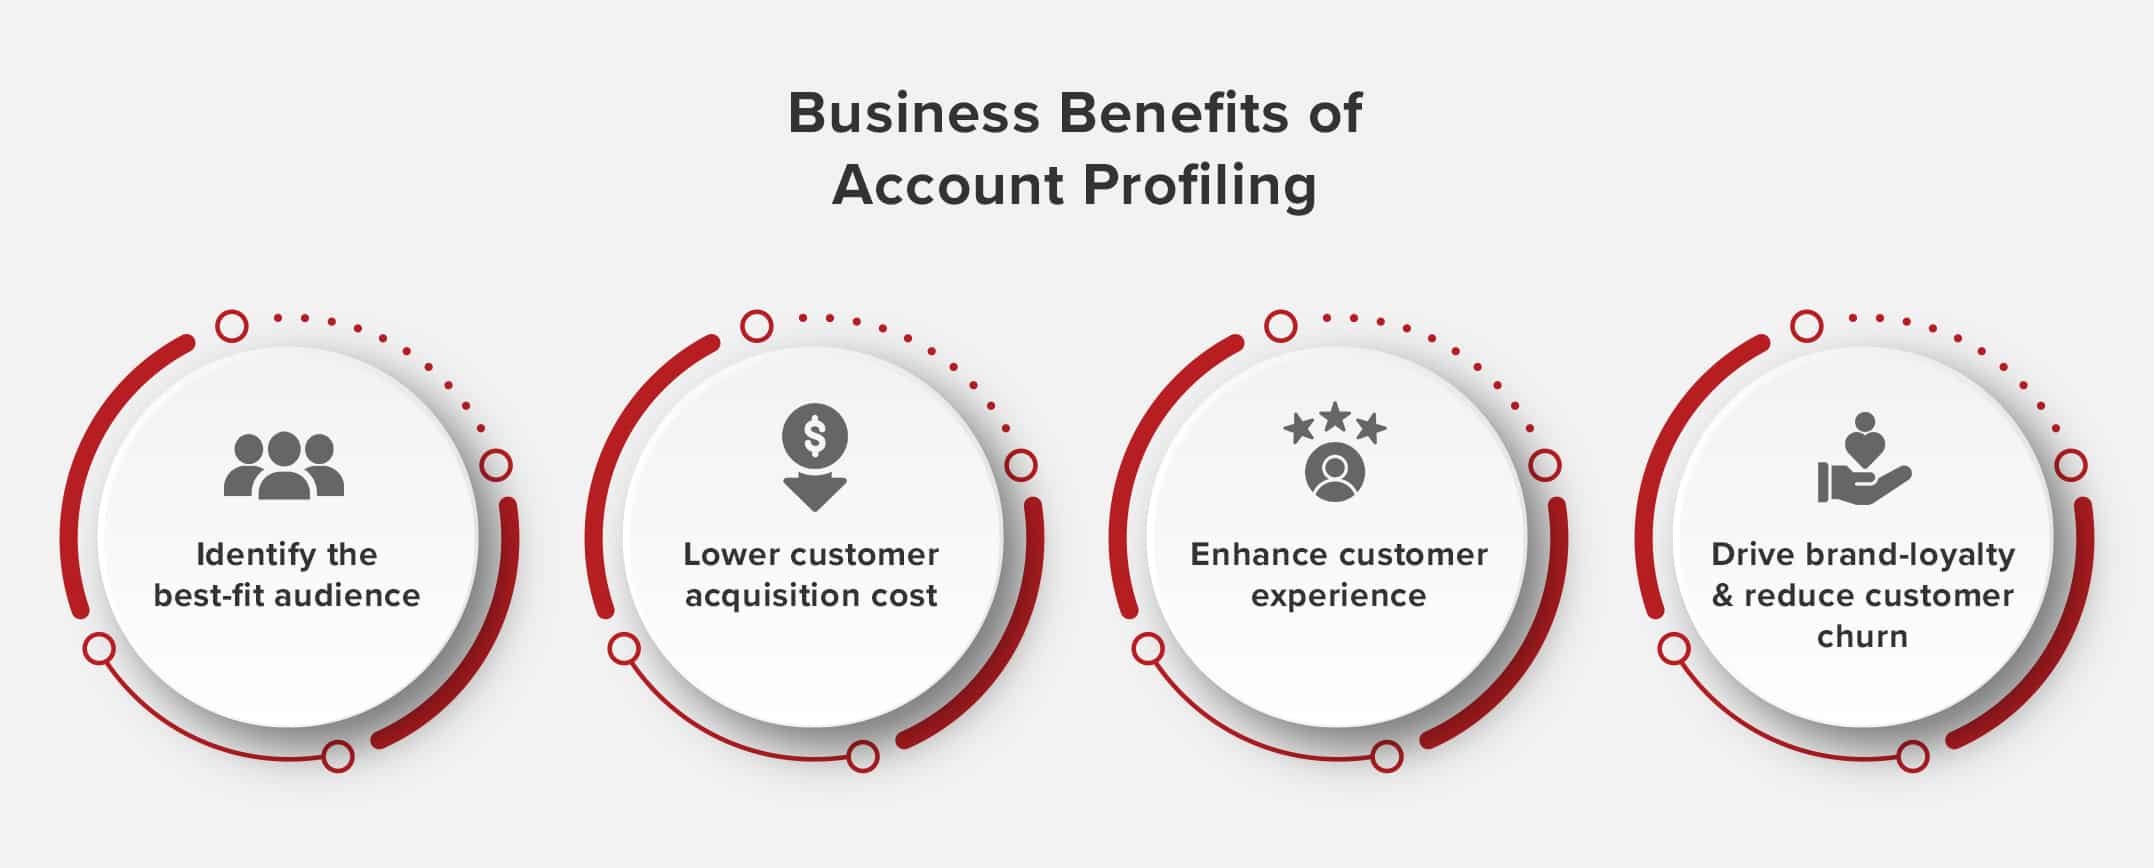 Business Benefits of Account Profiling